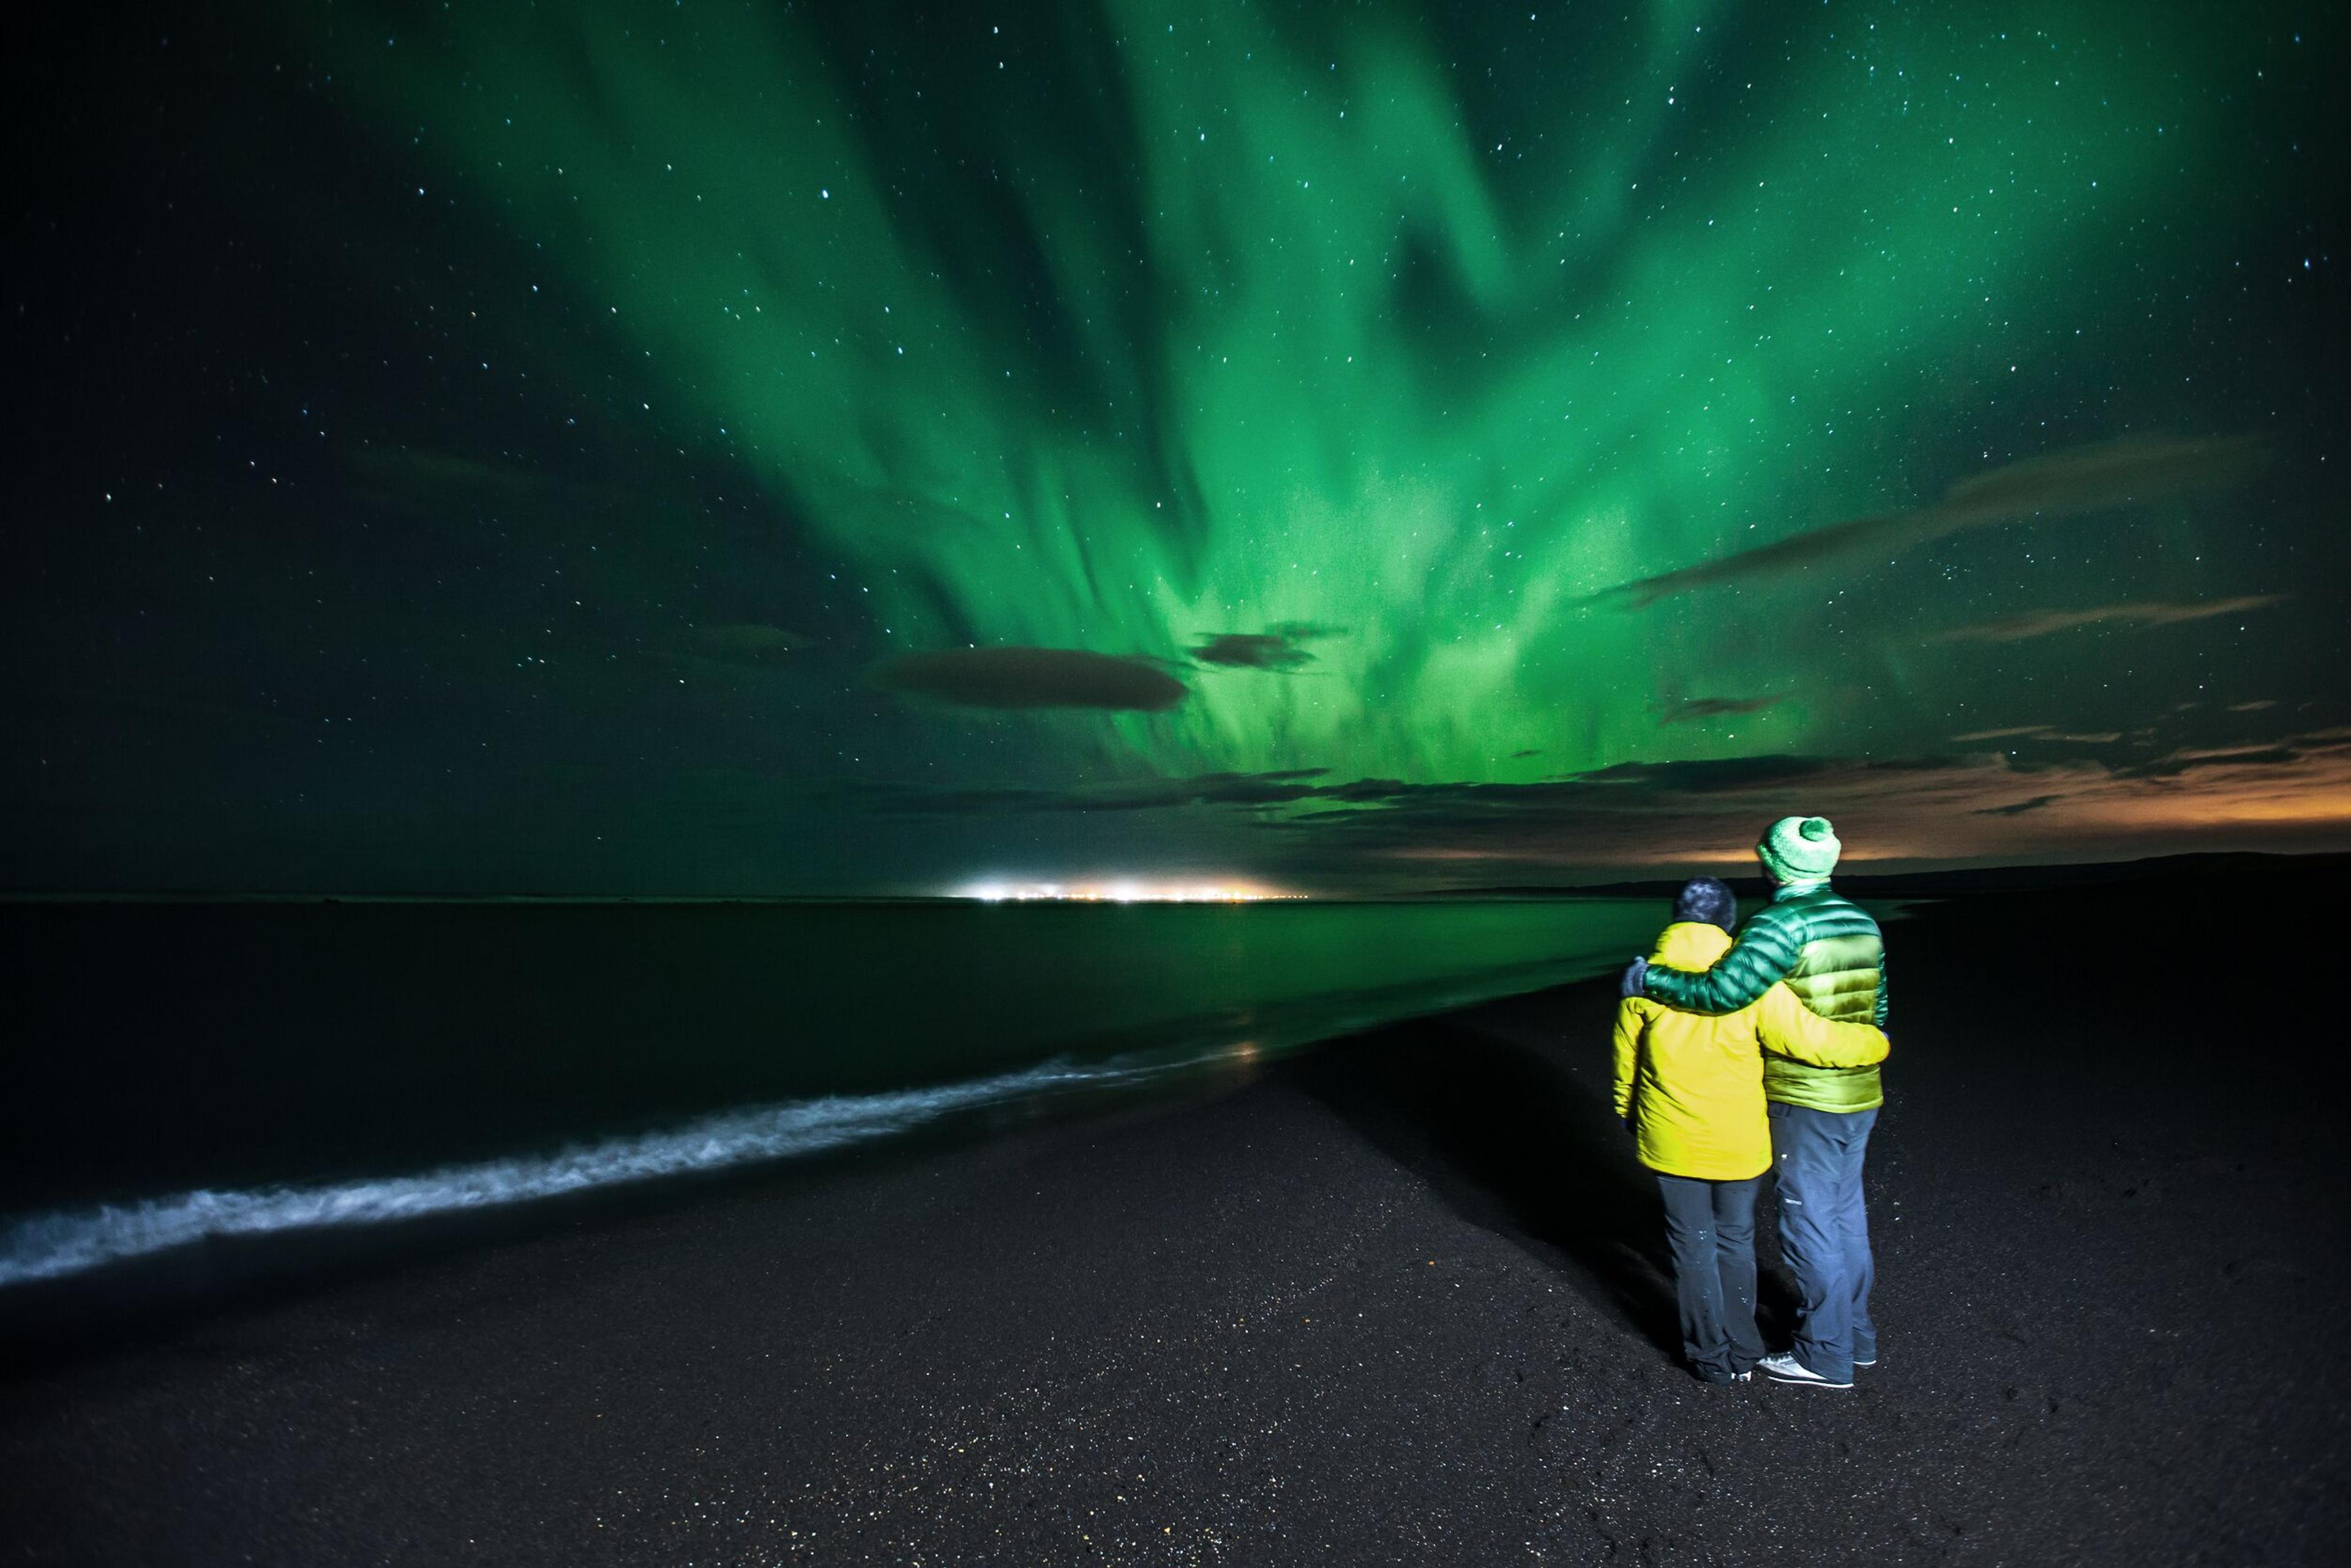 Two people embracing on a dark beach, gazing at the Northern Lights displaying a magnificent green aurora in the night sky.